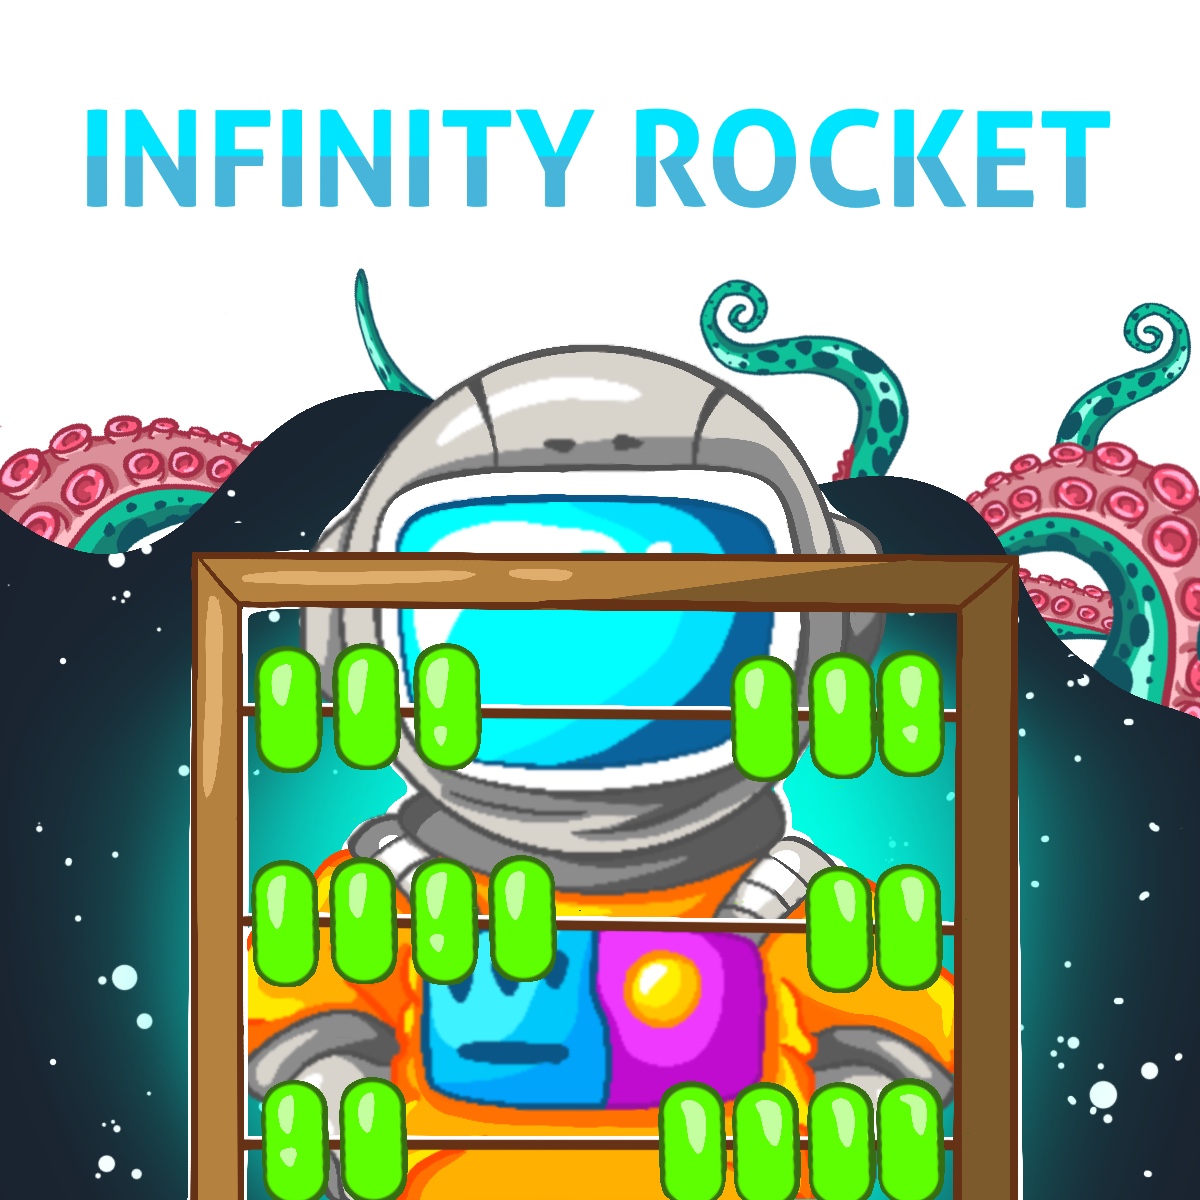 One thousand personal accounts has been created on the Infinity Rocket Launchpad